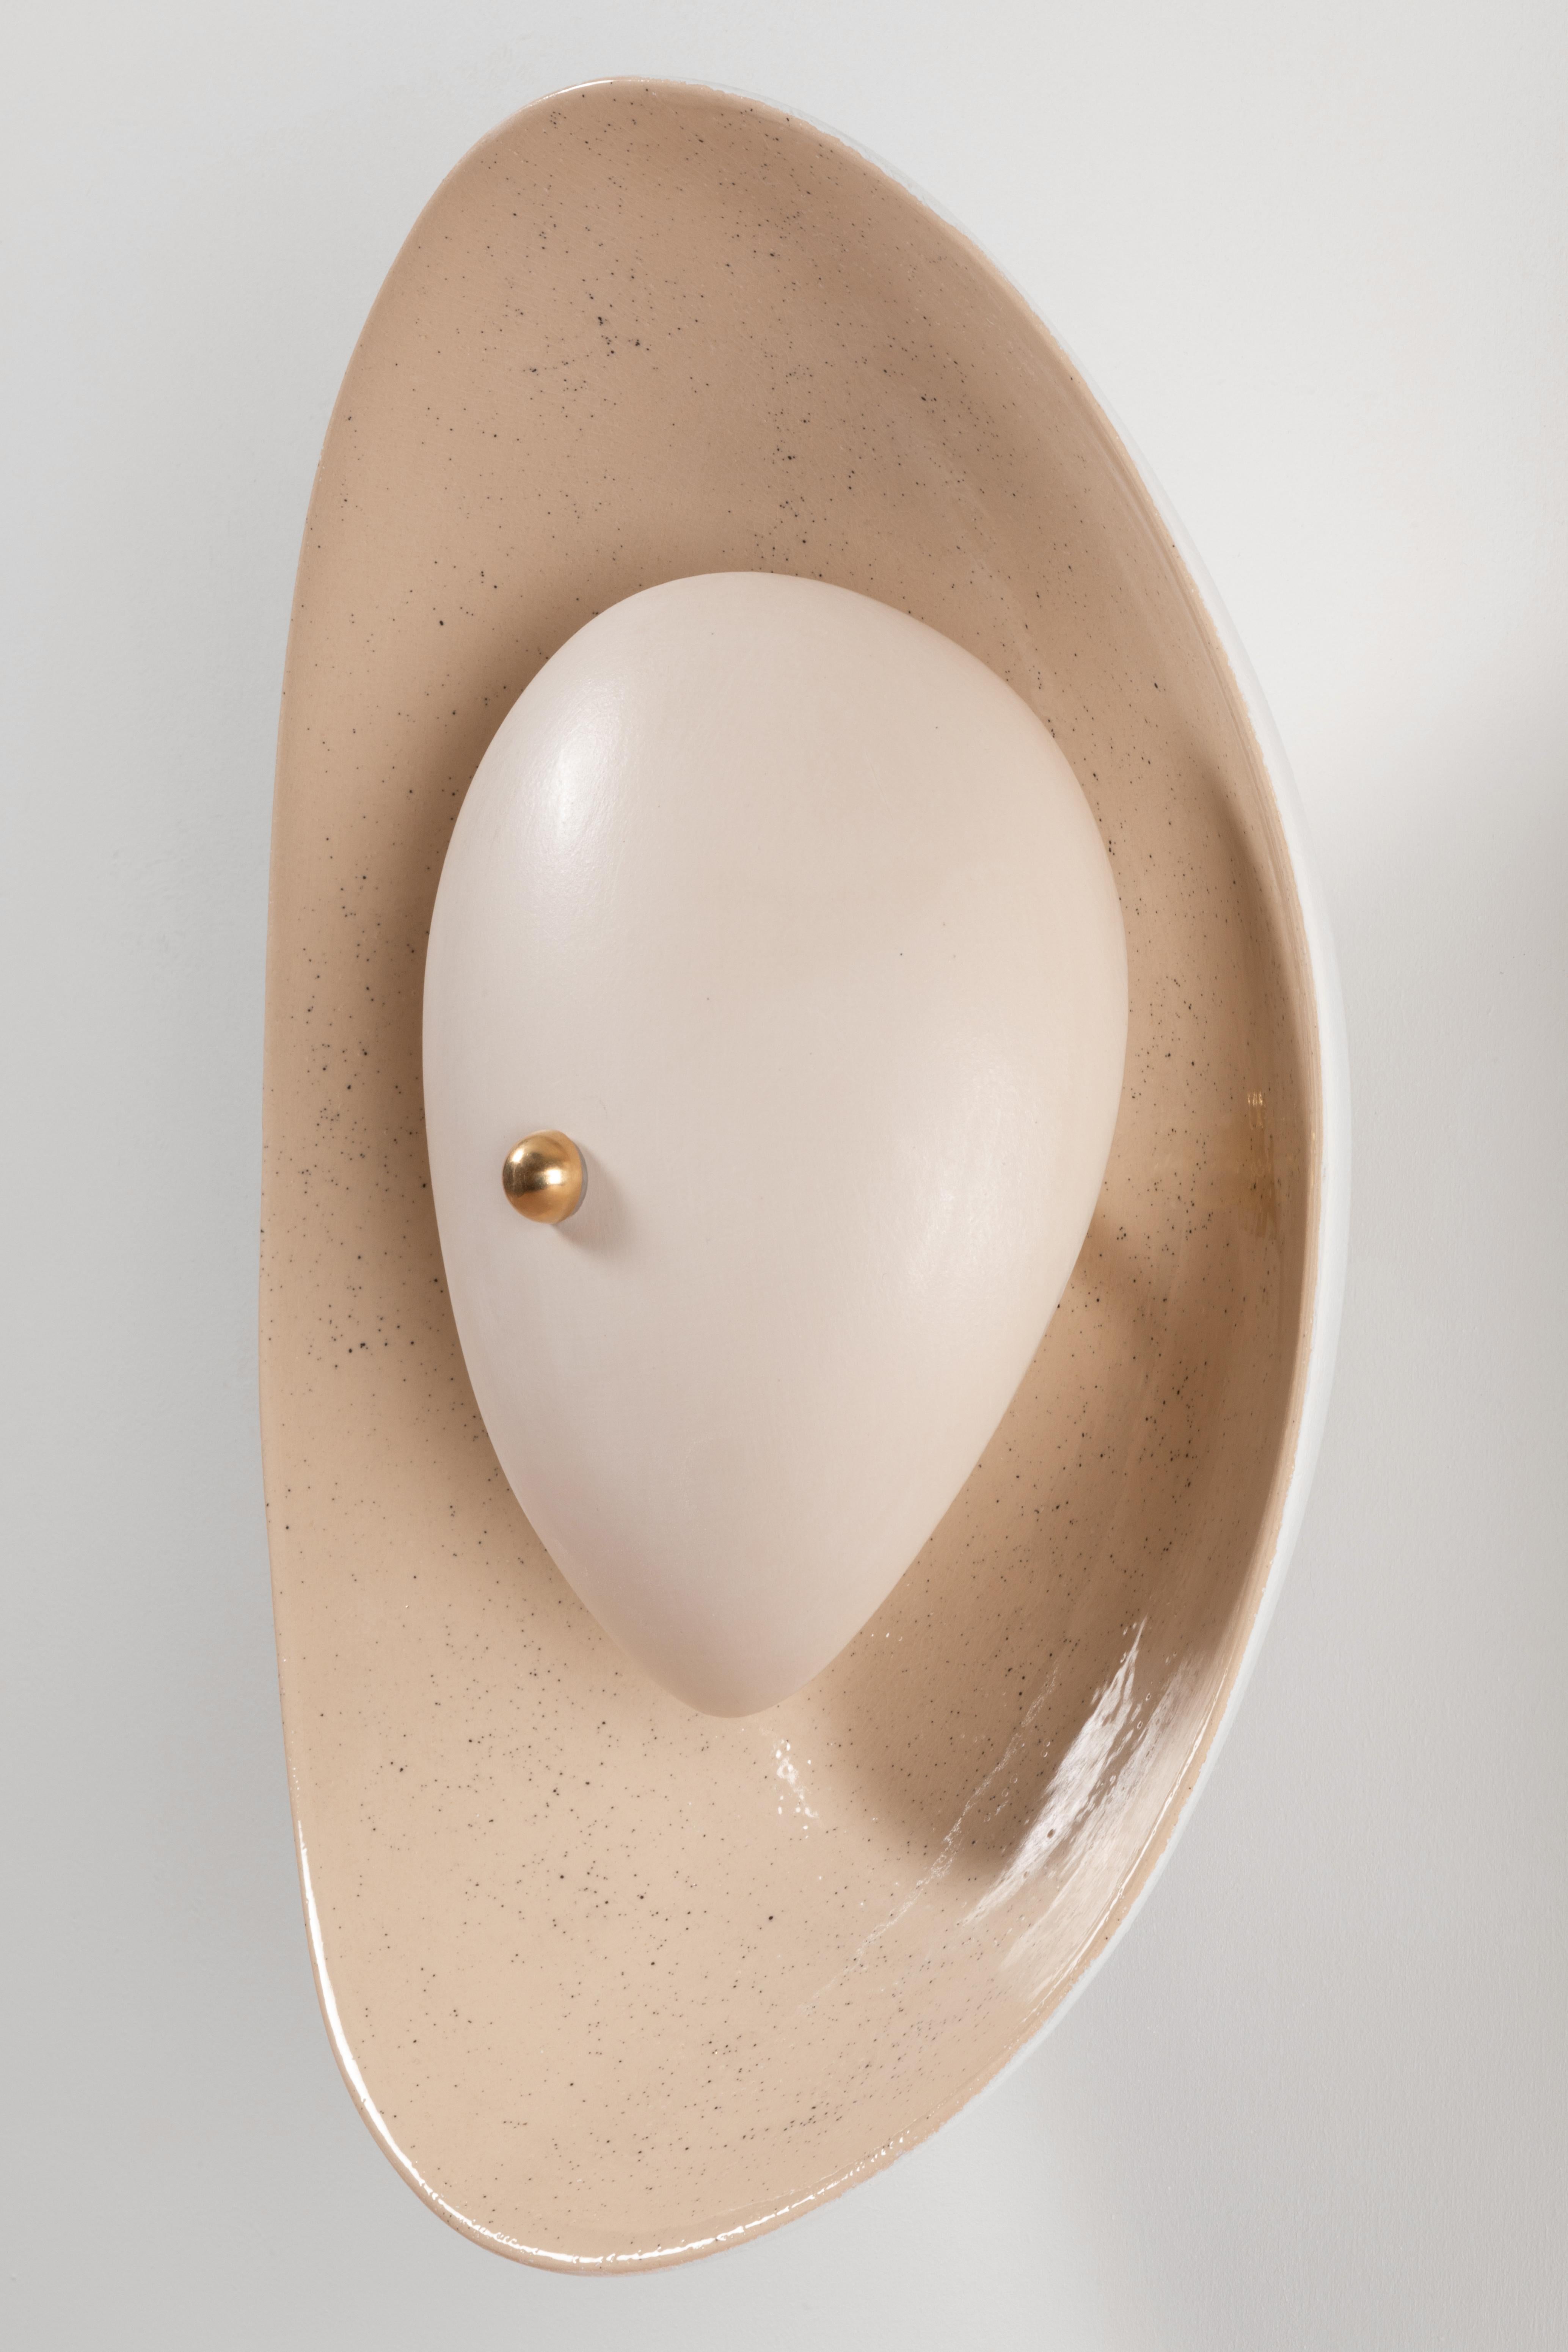 Hera wall sconce by Elsa Foulon
Dimensions: D 30 x W 15 x H 35 cm
Materials: Ceramic, Brass
Unique Piece
Also available in different finishes

All our lamps can be wired according to each country. If sold to the USA it will be wired for the